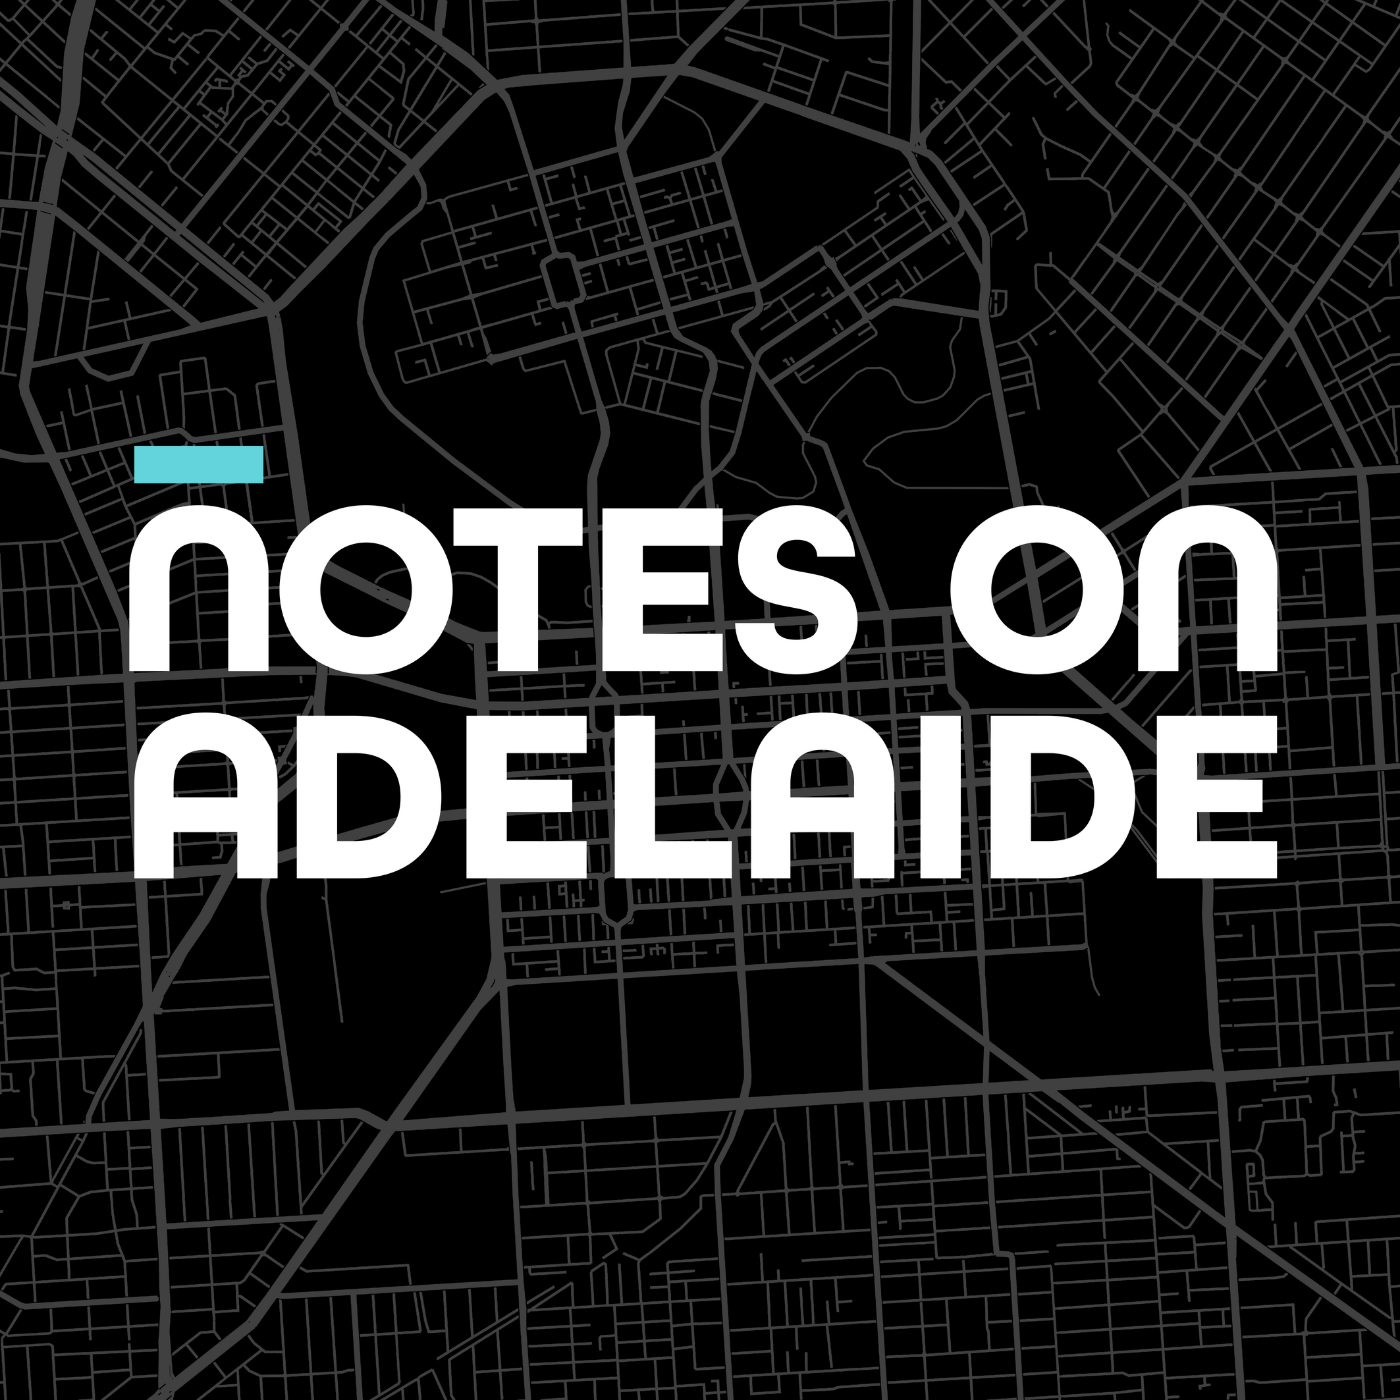 Notes on Adelaide